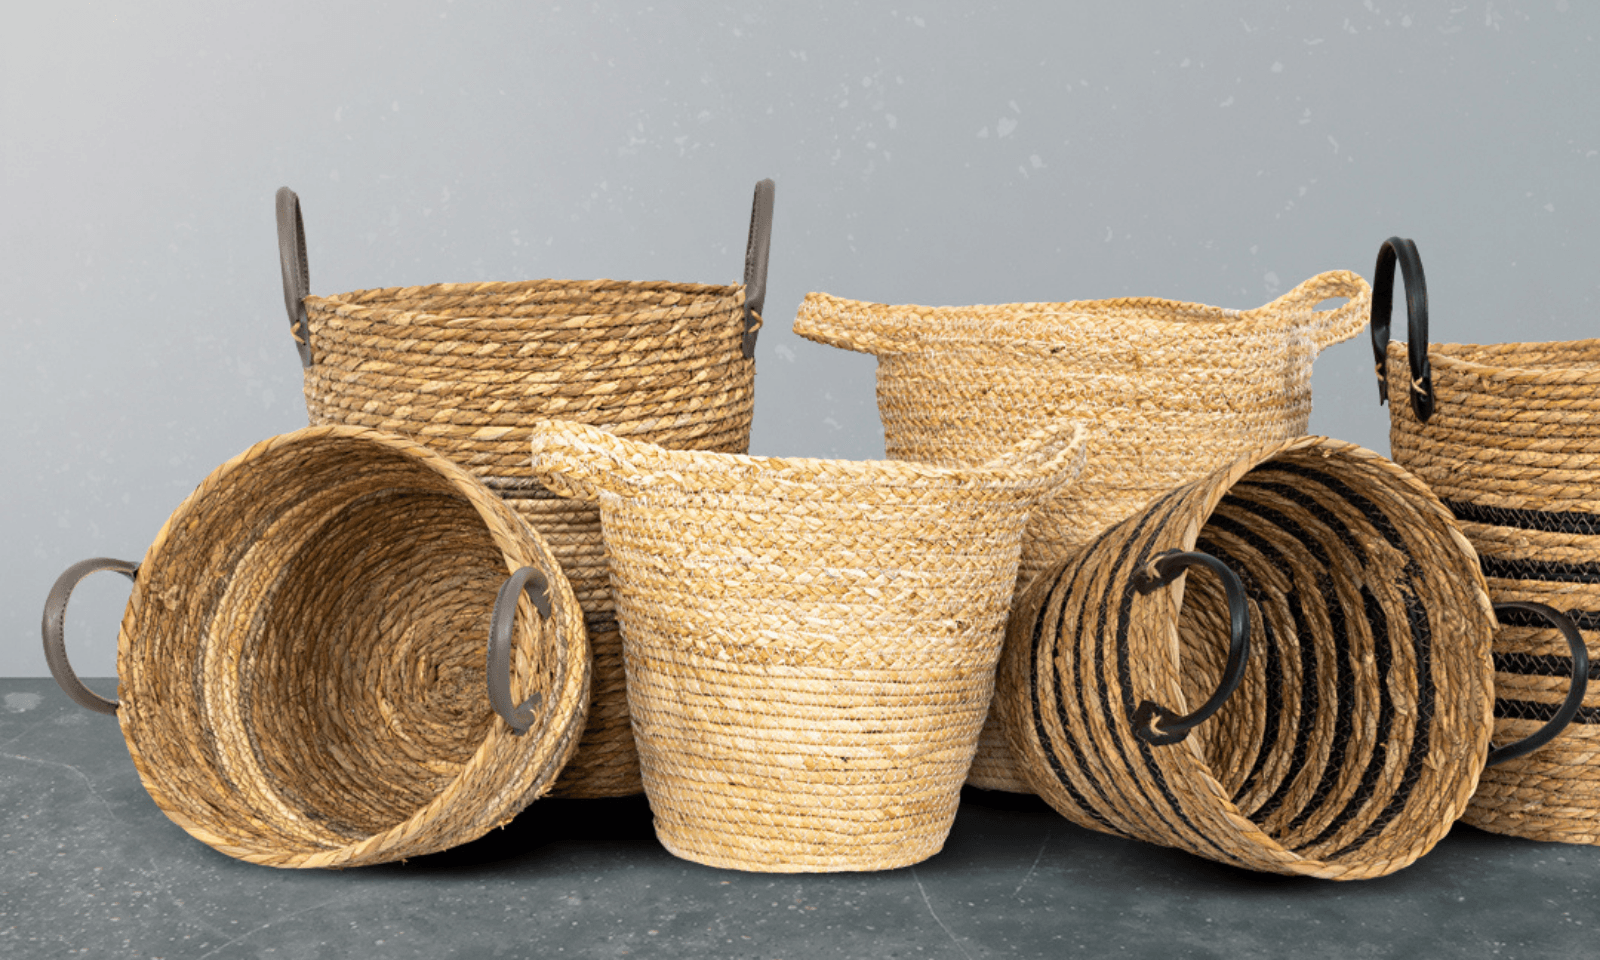 HOW TO USE BASKETS AS STORAGE - Leather Gallery